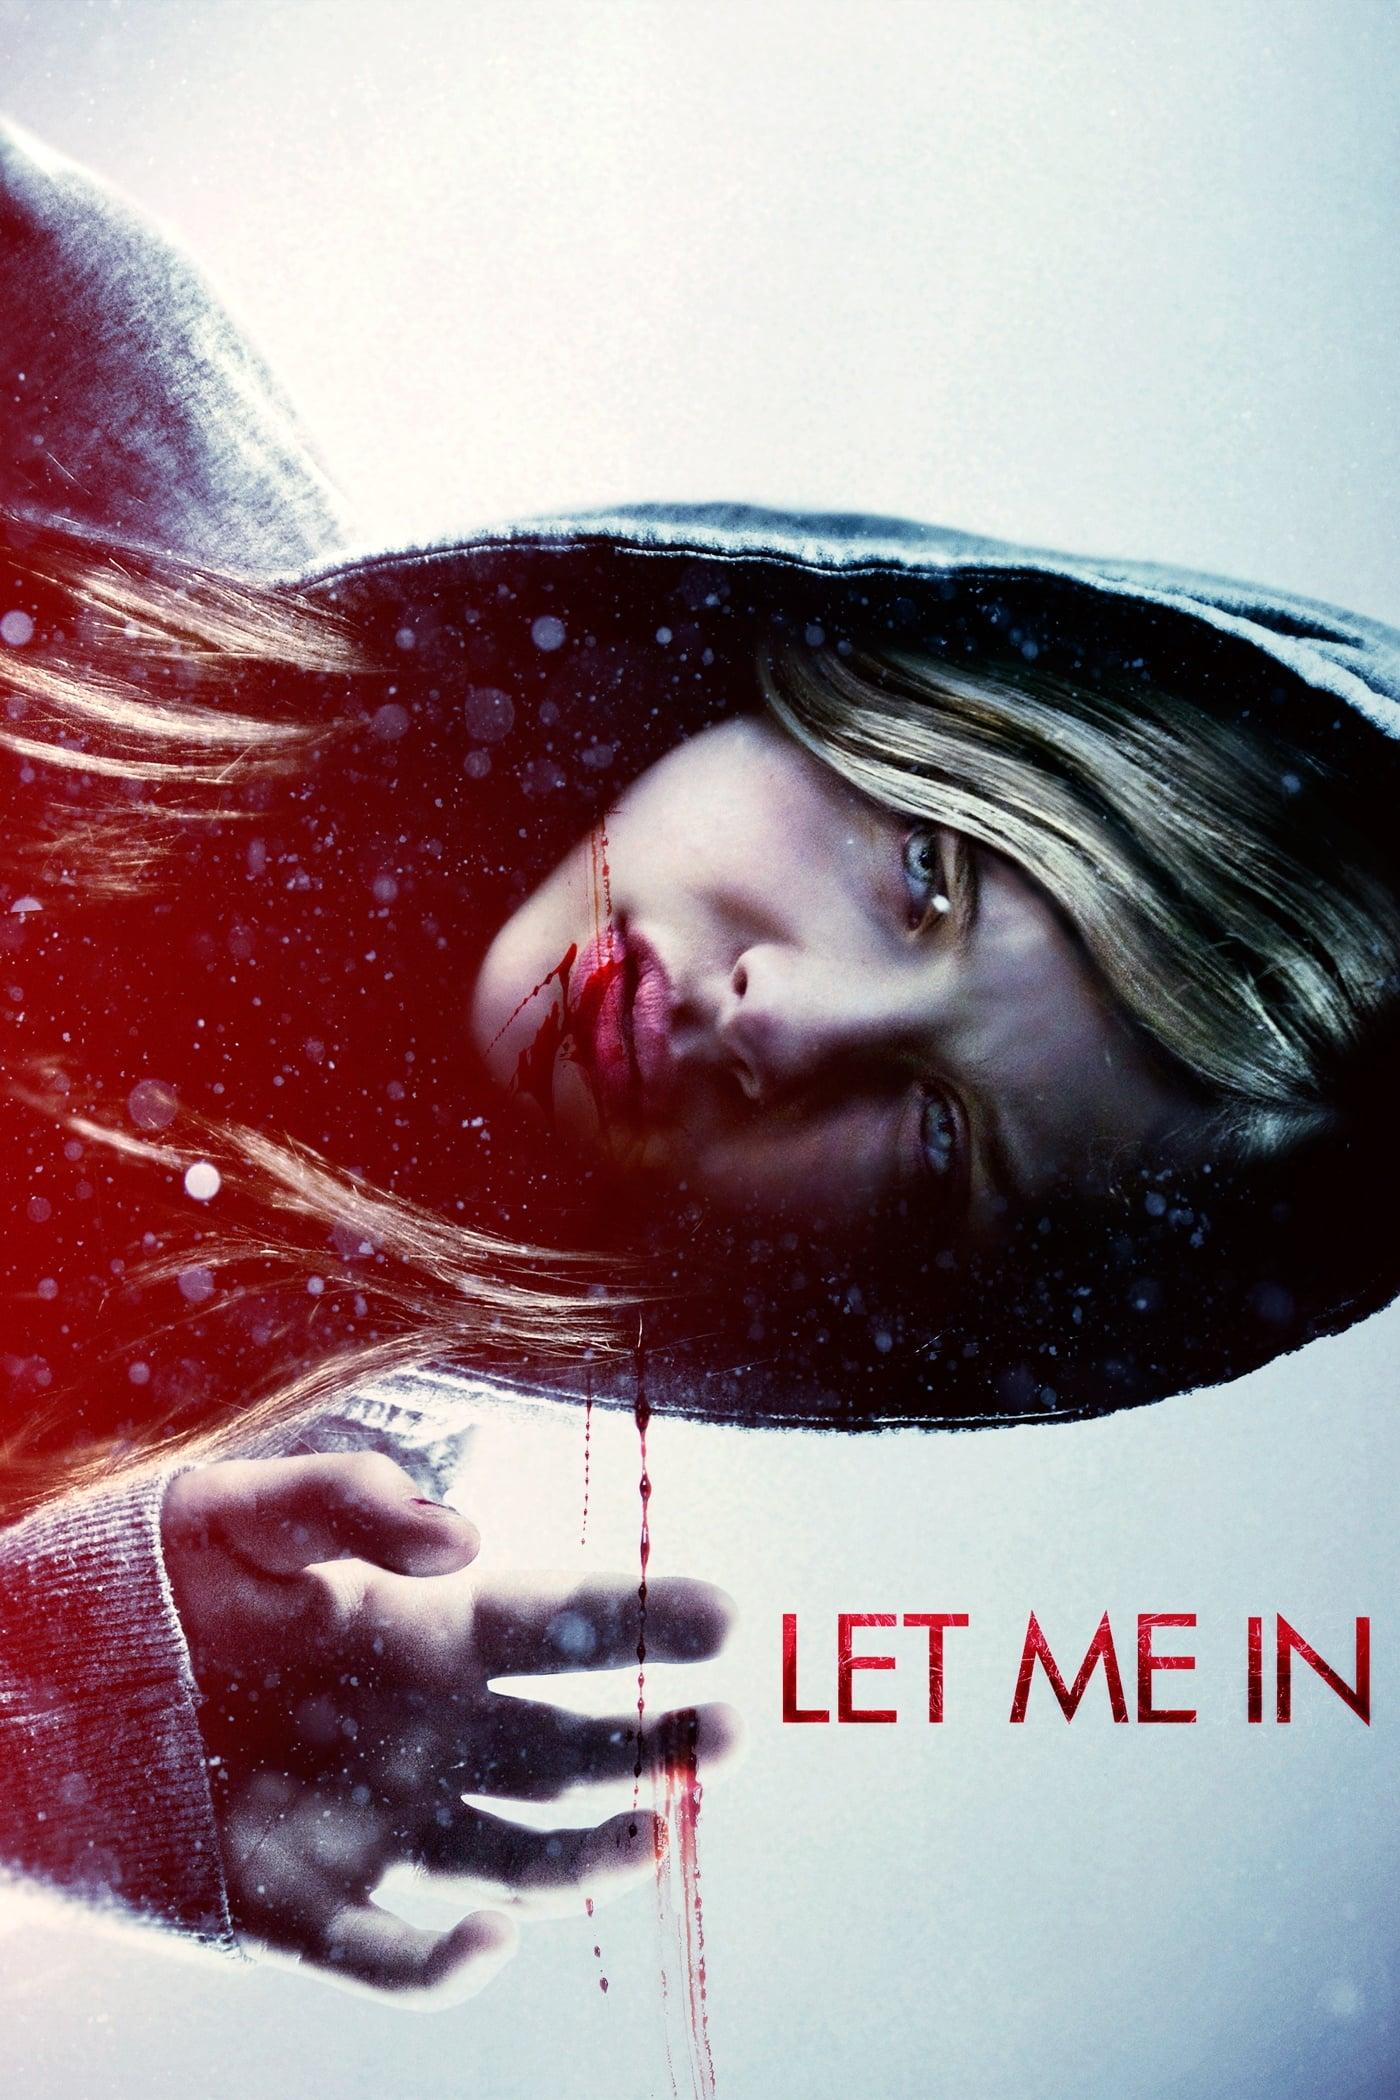 Let Me In poster